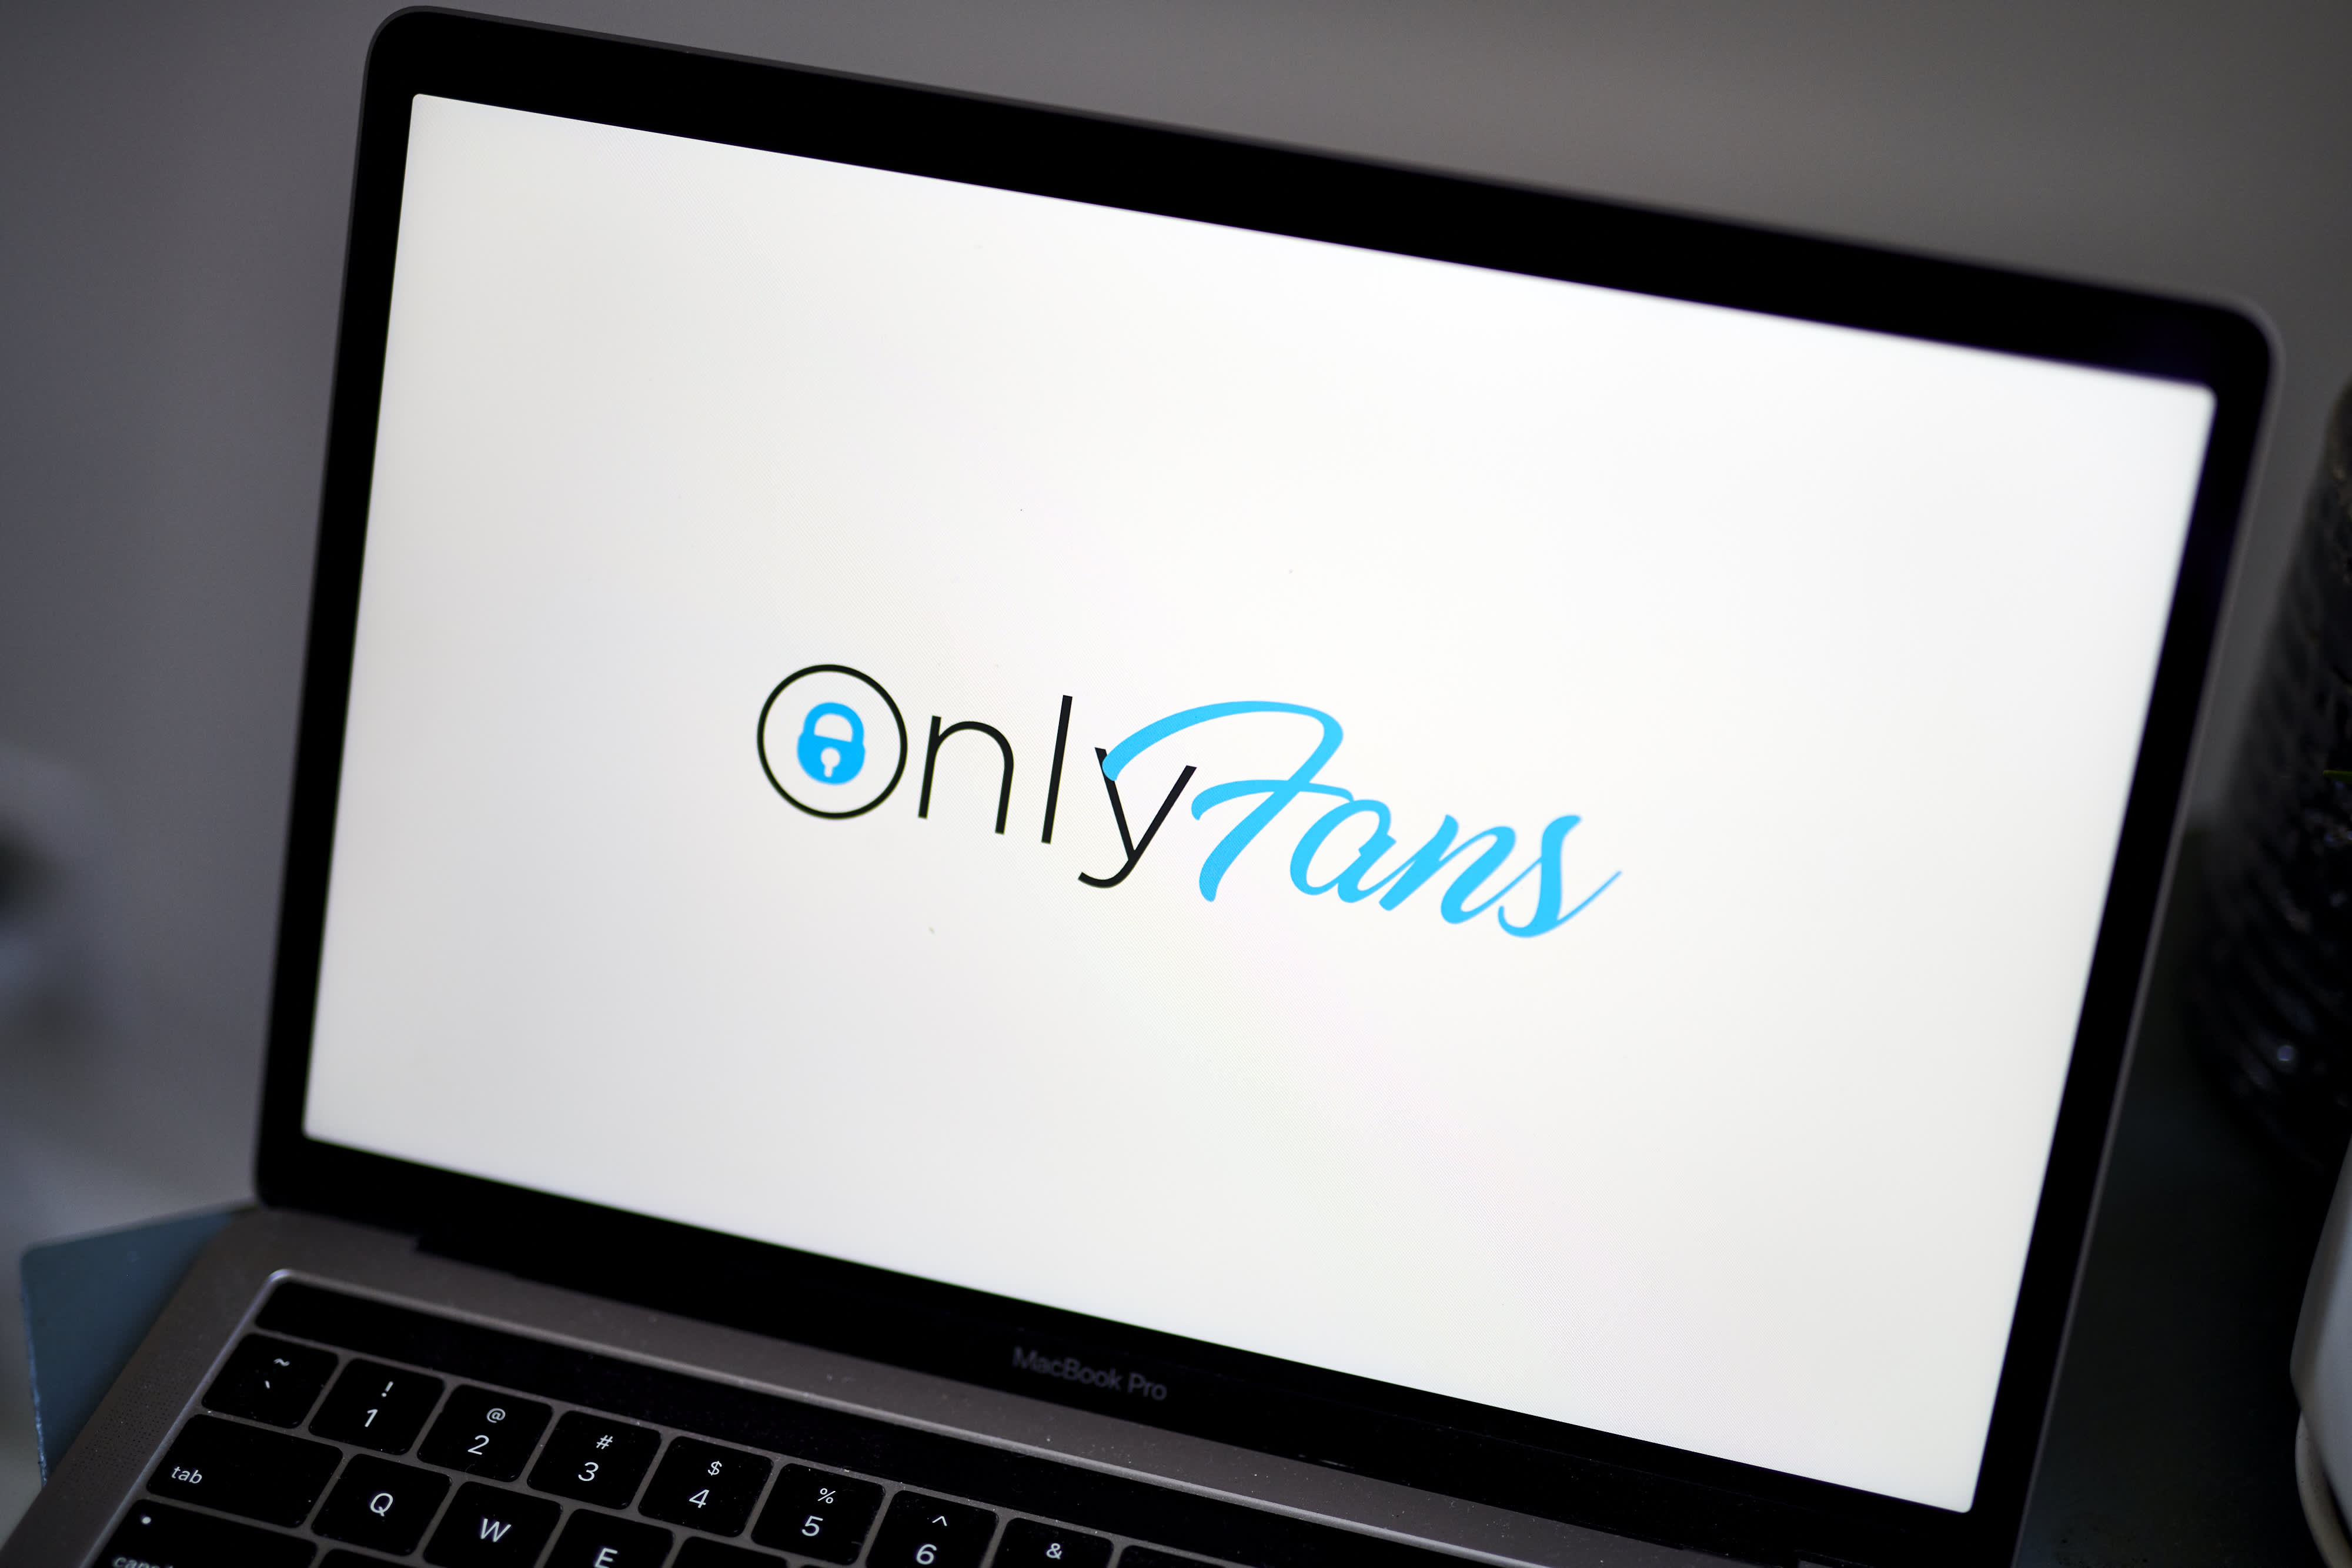 Workers Rape Porn Videos - OnlyFans bans sexually explicit content